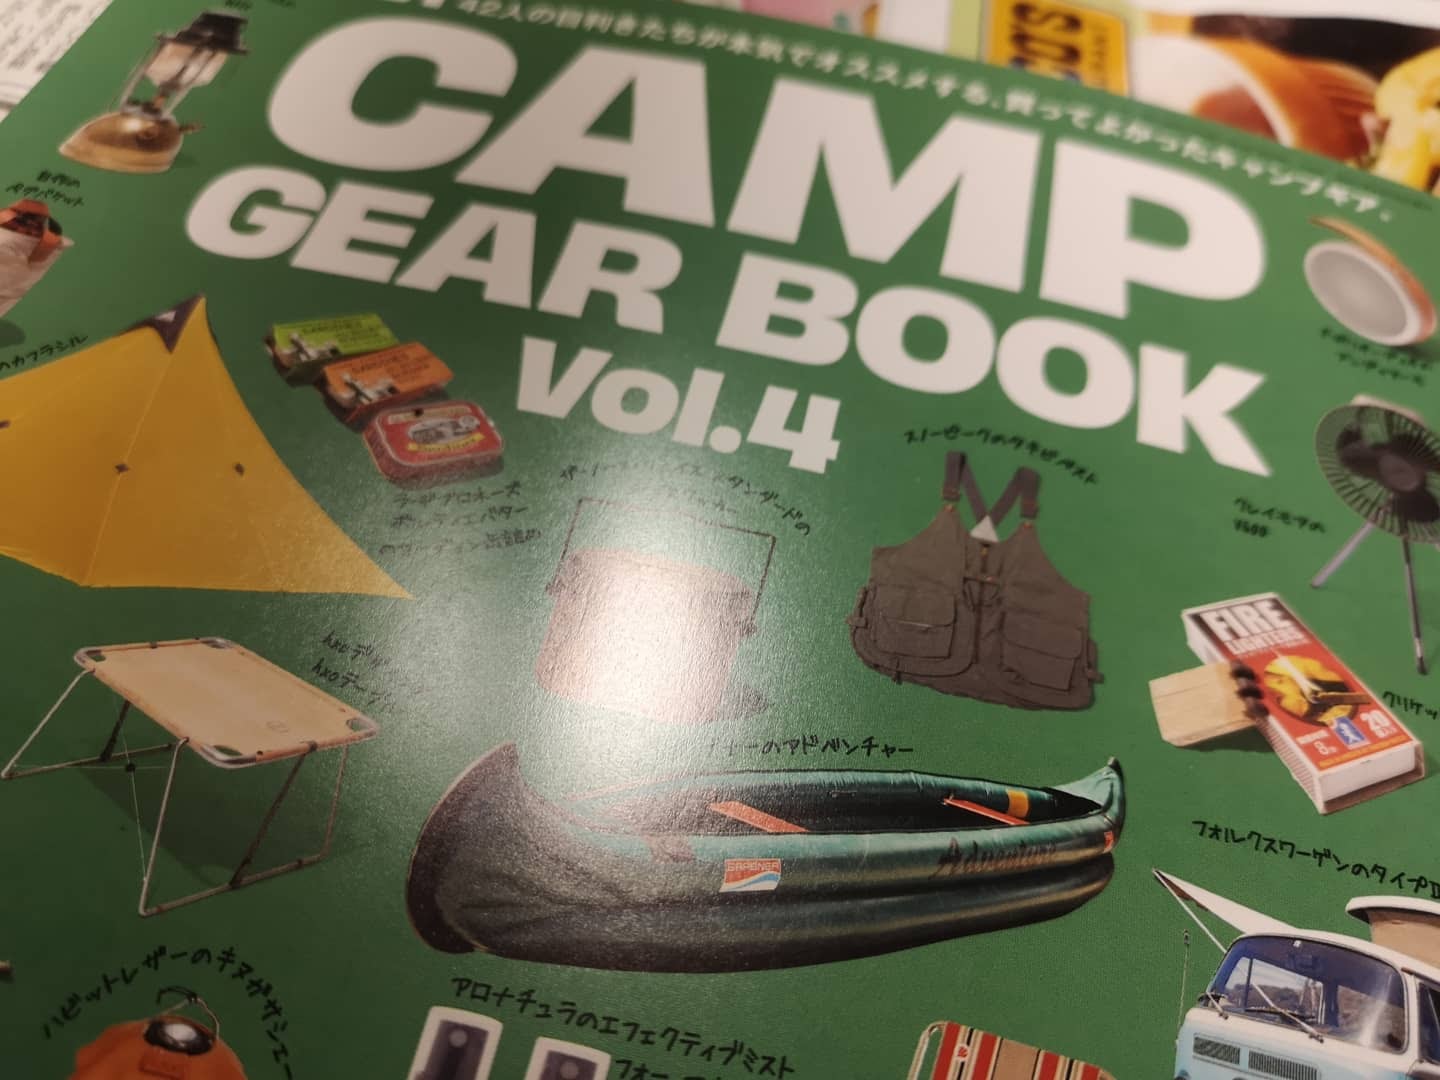 GO OUT CAMP GEAR vol.4に掲載されました。